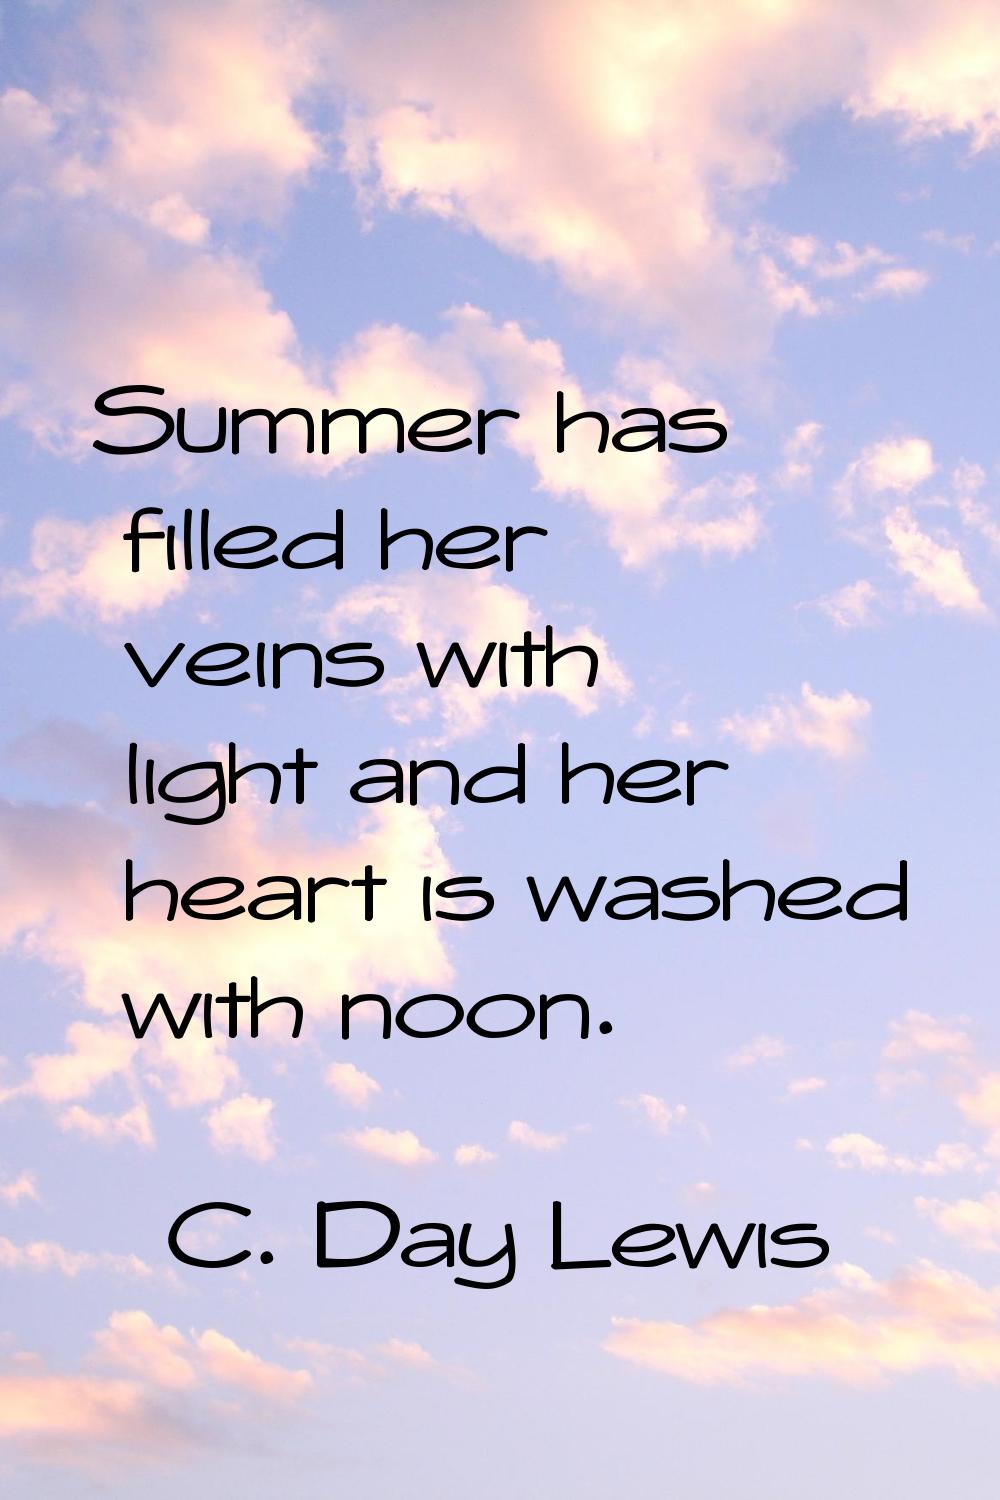 Summer has filled her veins with light and her heart is washed with noon.